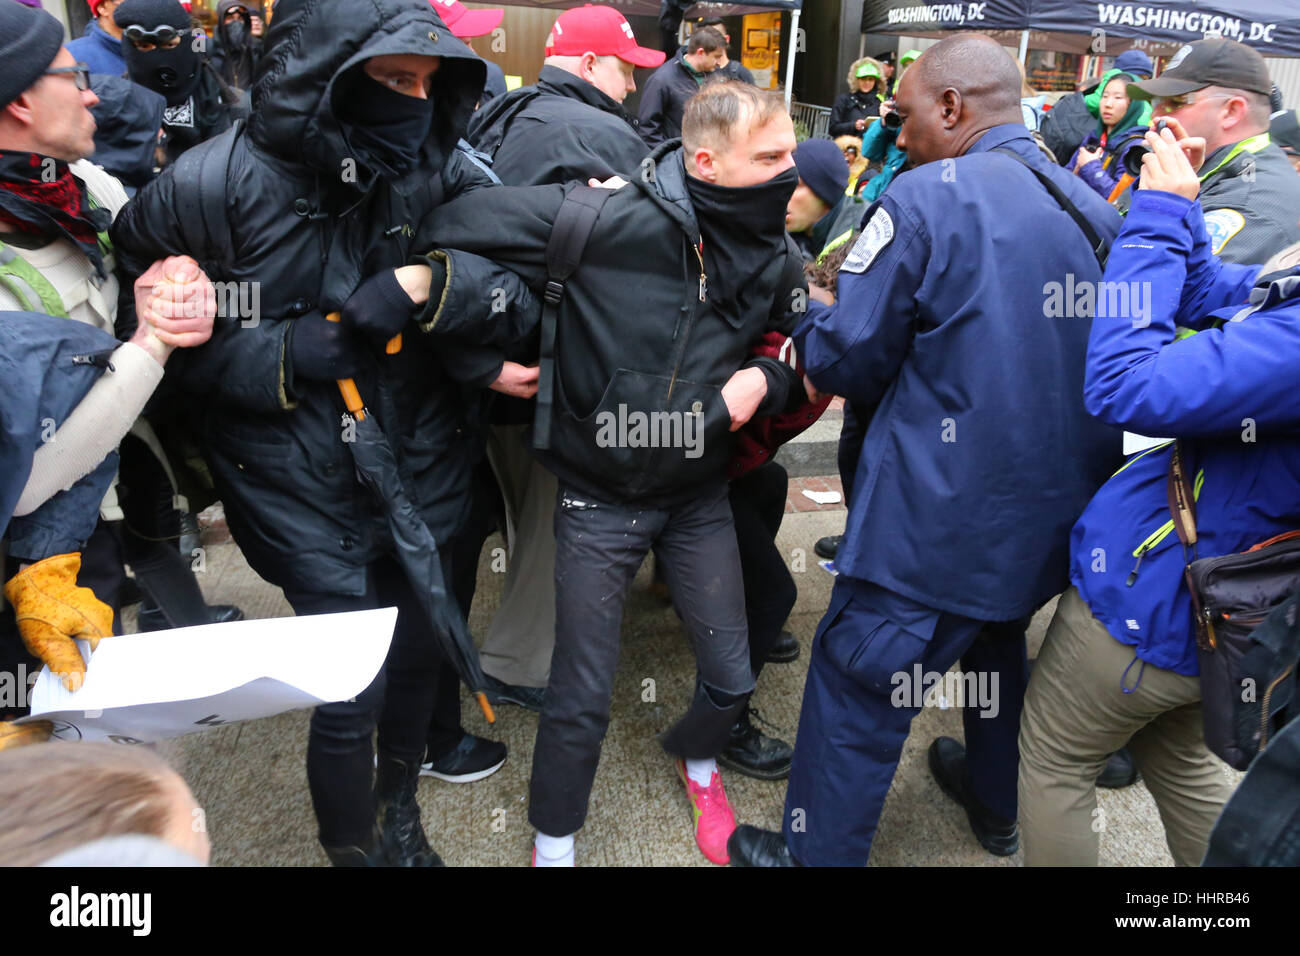 Washington DC, USA. January 20, 2017. Black-clad protesters use direct action techniques--of linking arms--to resist a police attempt to separate them at a security checkpoint blockade into the Inaugural Parade. Stock Photo